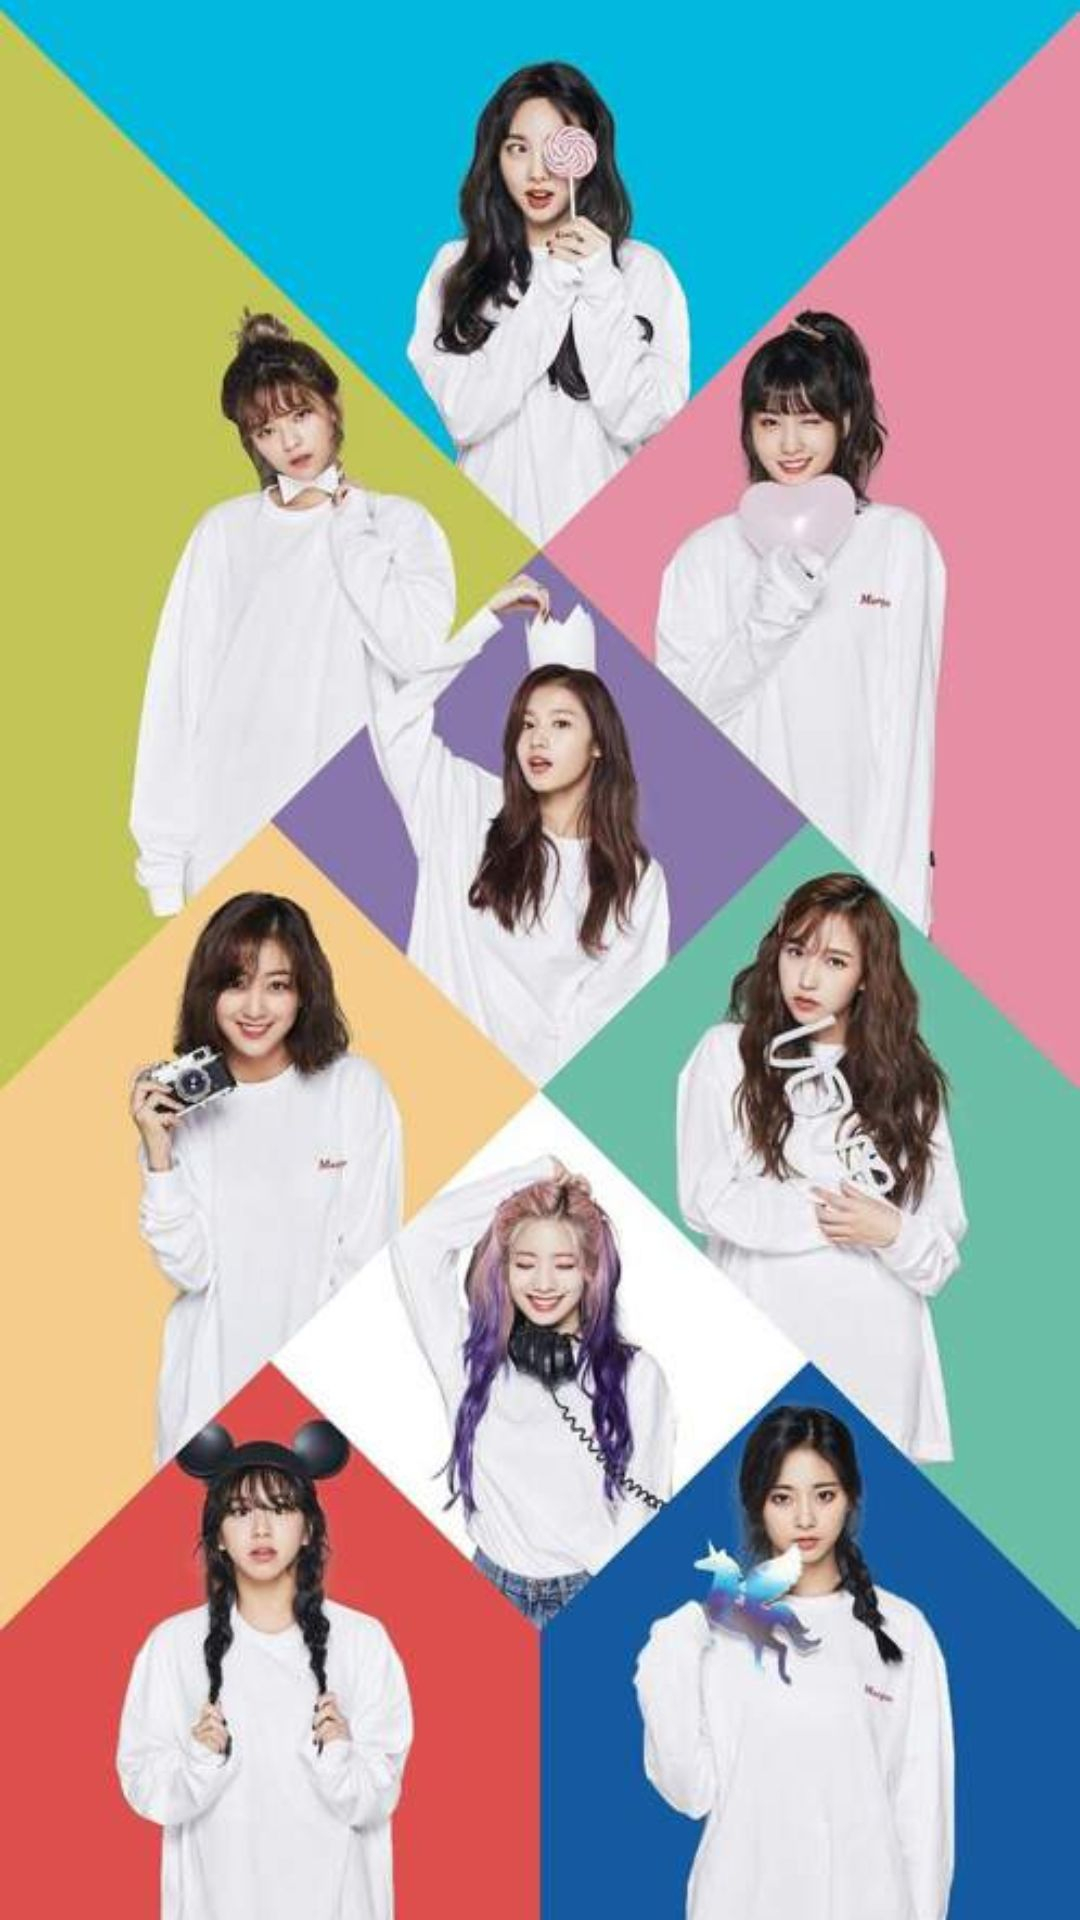 1080x1920 Twice Wallpapers Top 30 Best Twice Wallpapers [ HQ